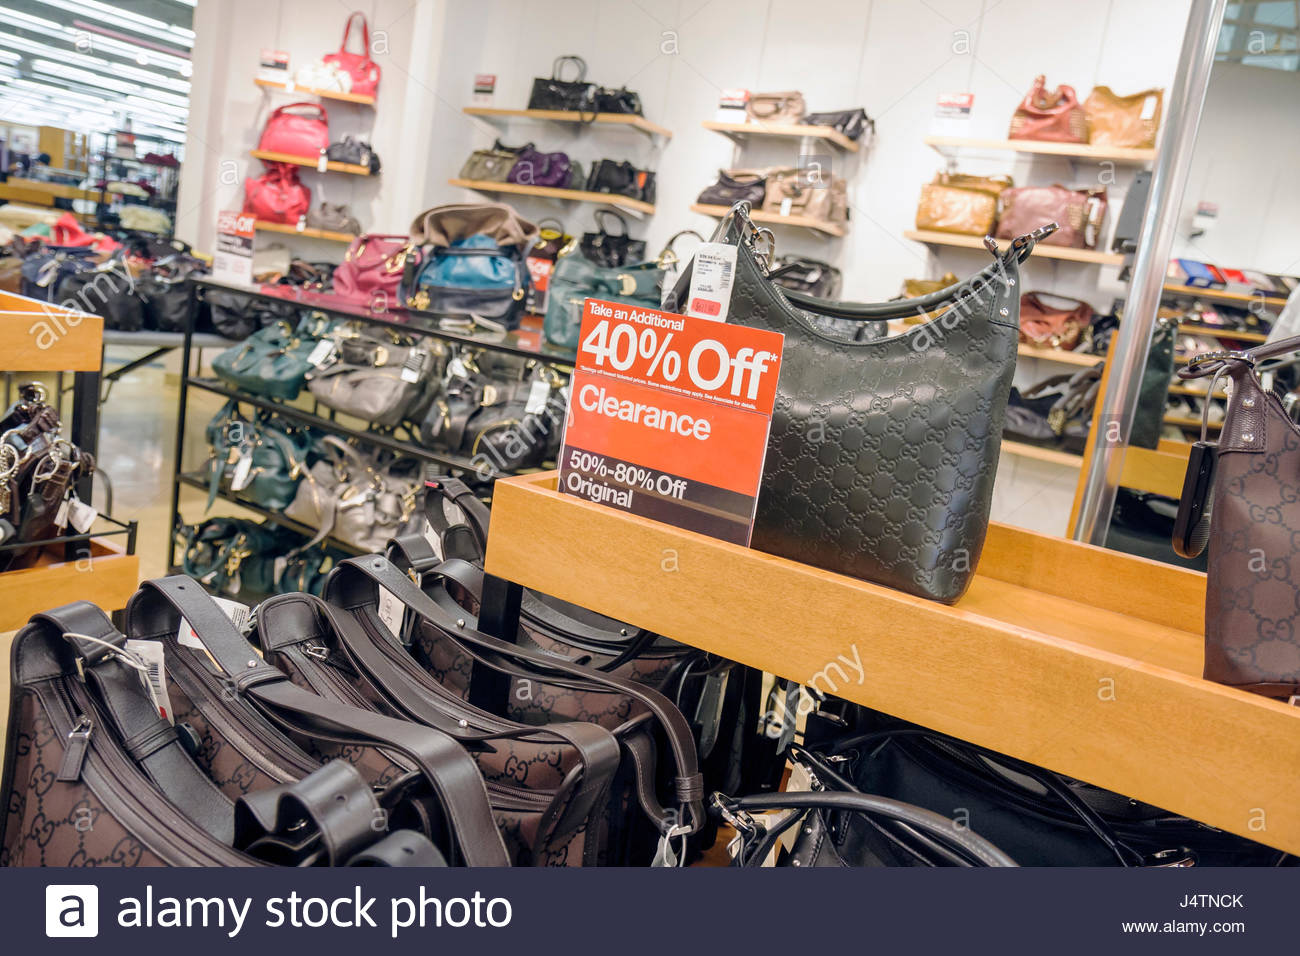 Gucci Mall Stock Photos & Gucci Mall Stock Images - Alamy